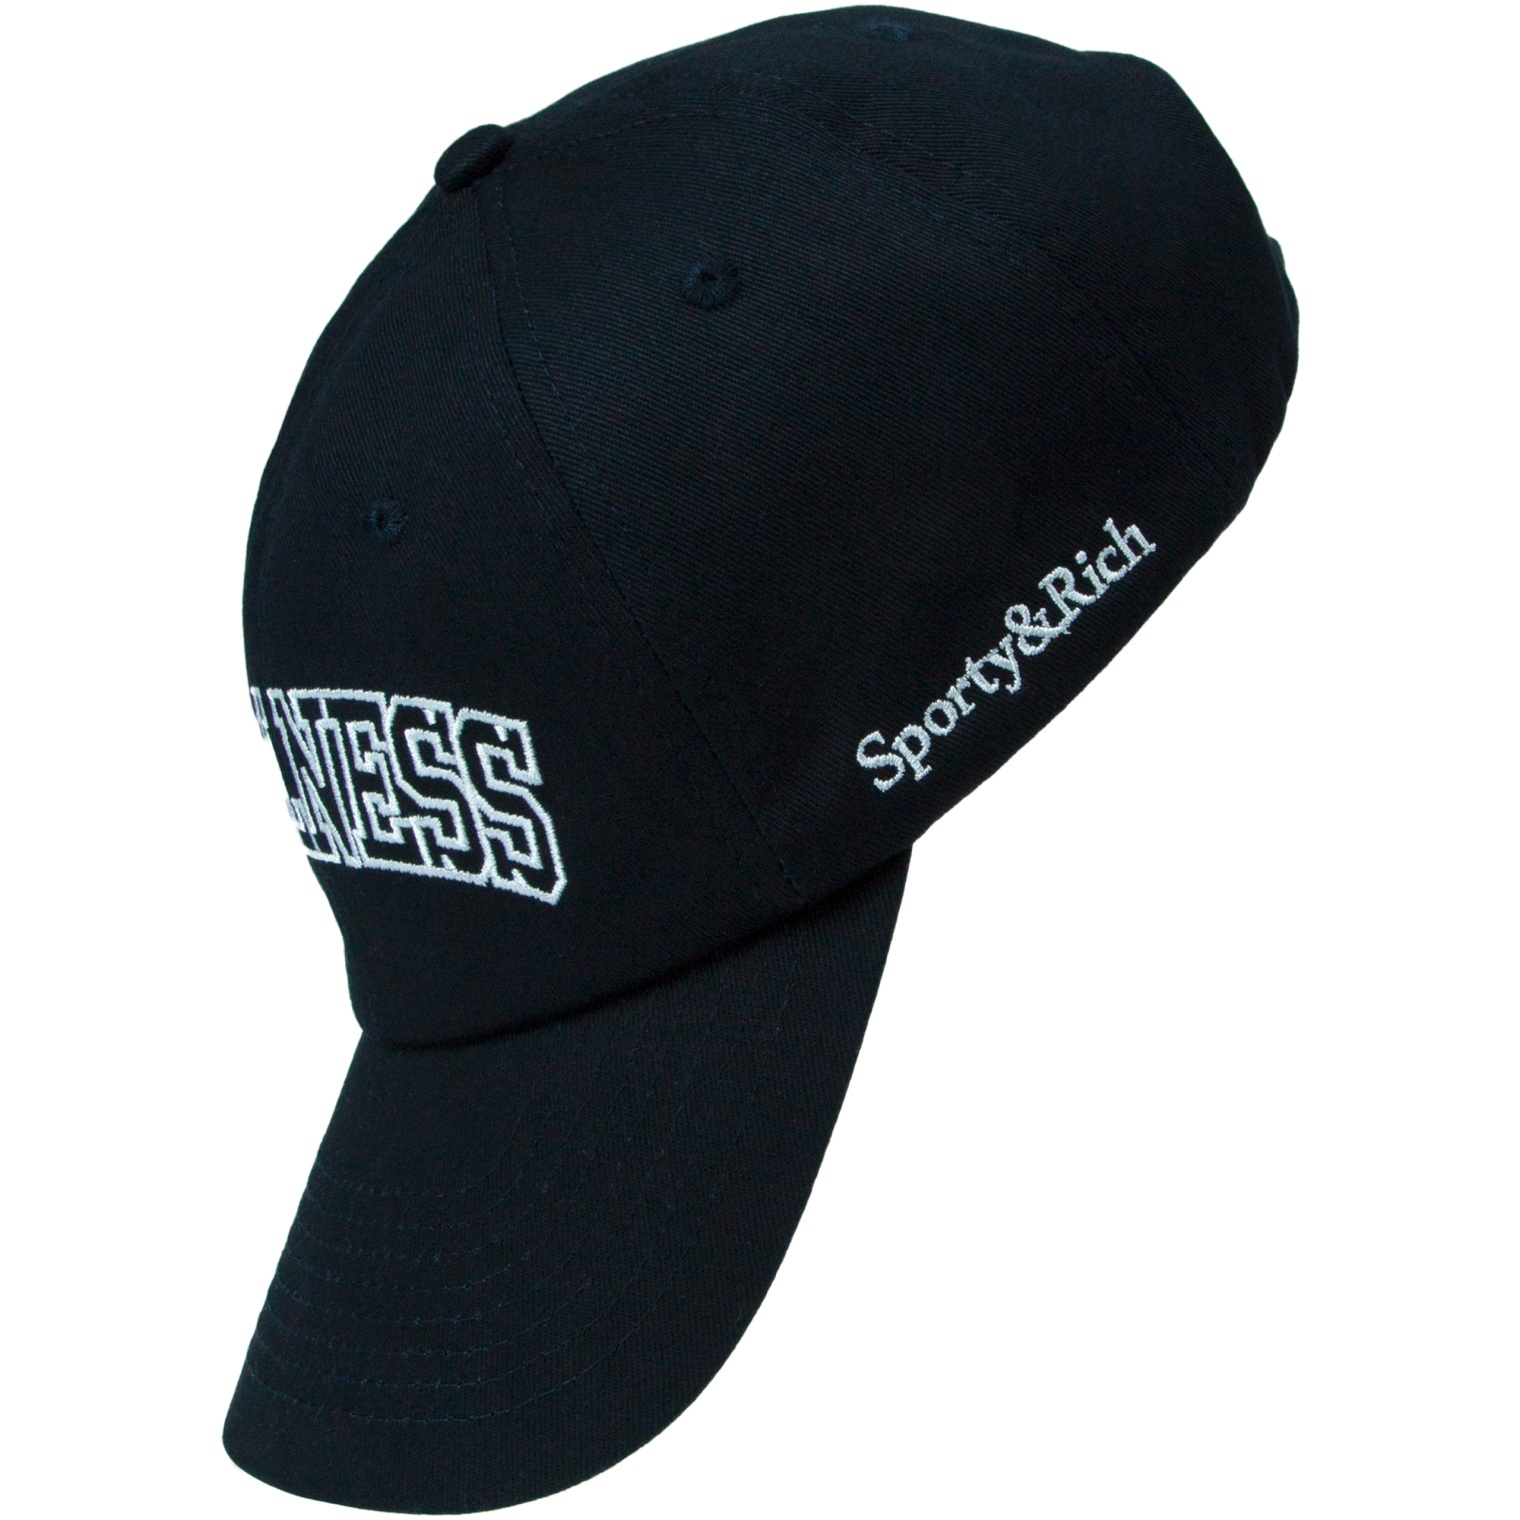 SPORTY & RICH \'Wellness\' embroidered cap